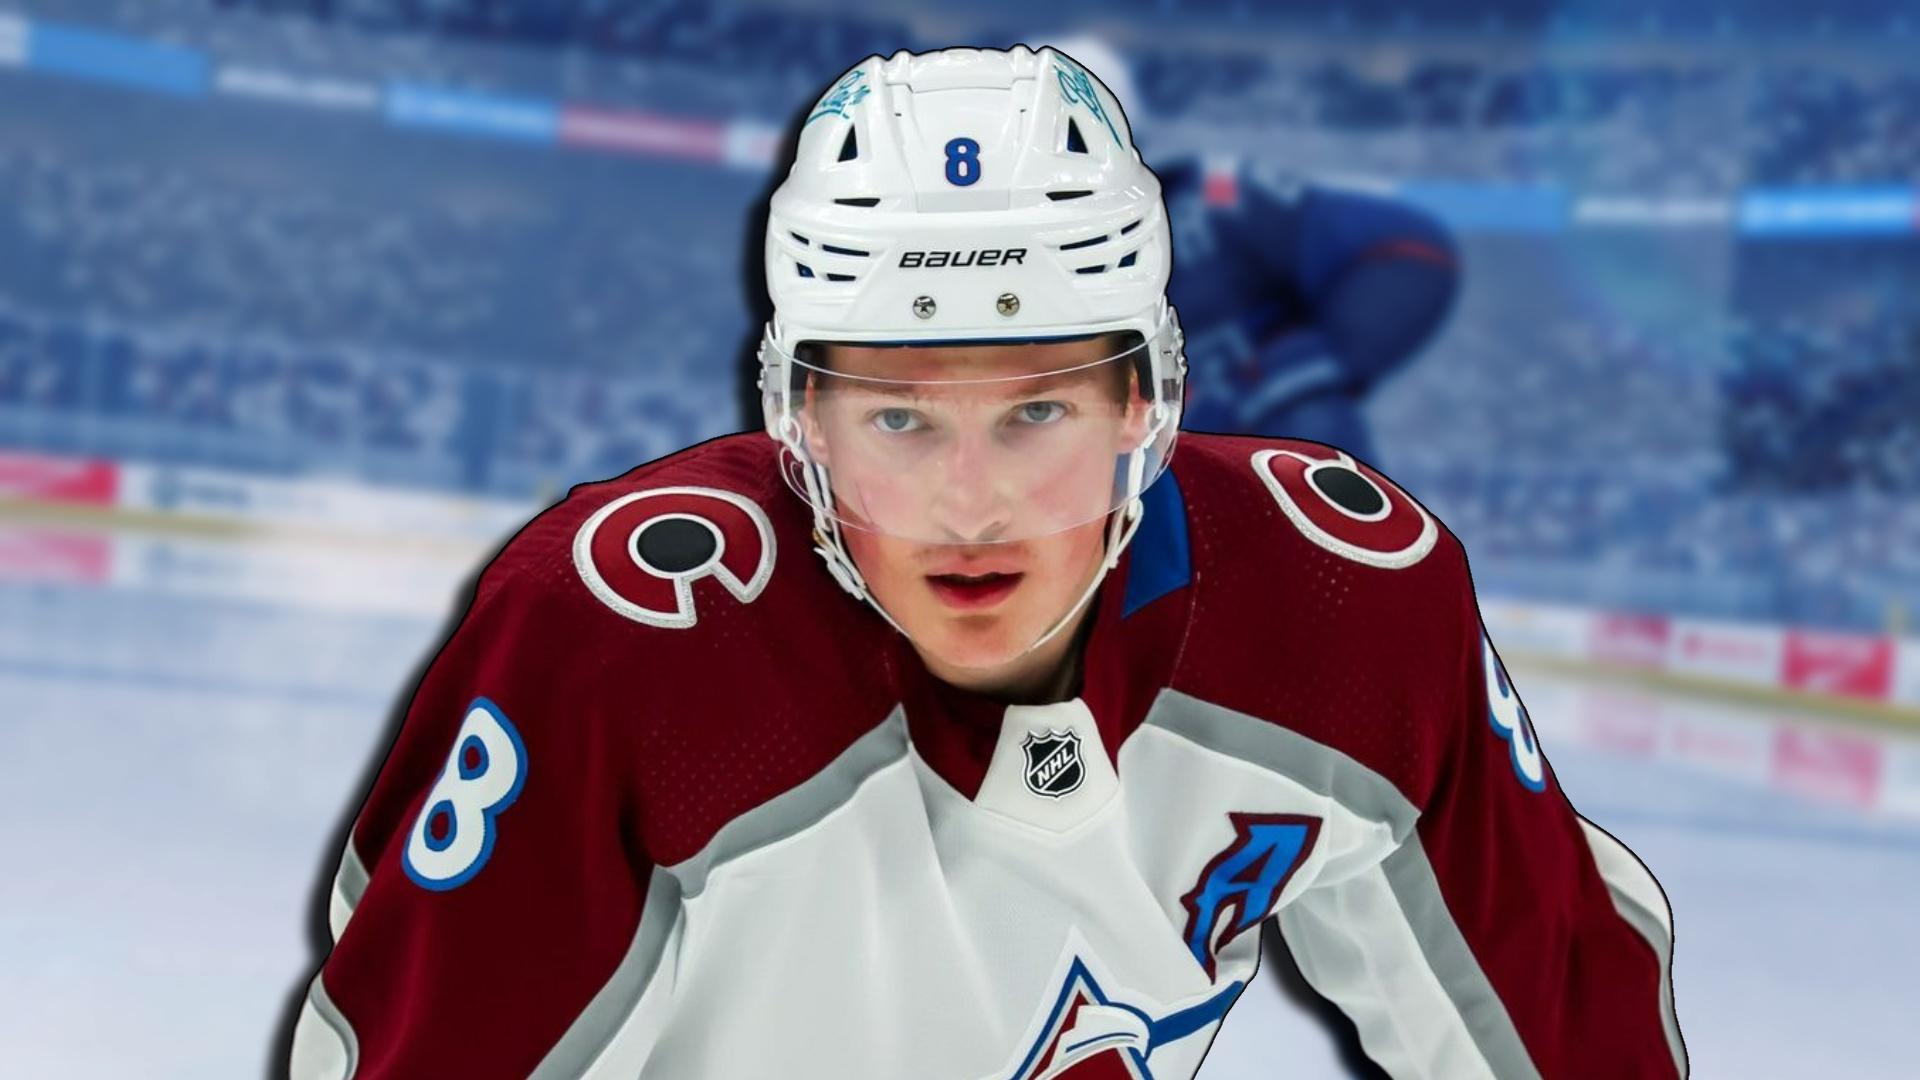 EA Sports NHL 24 Cale Makar From Colorado Avalanche Is The Cover